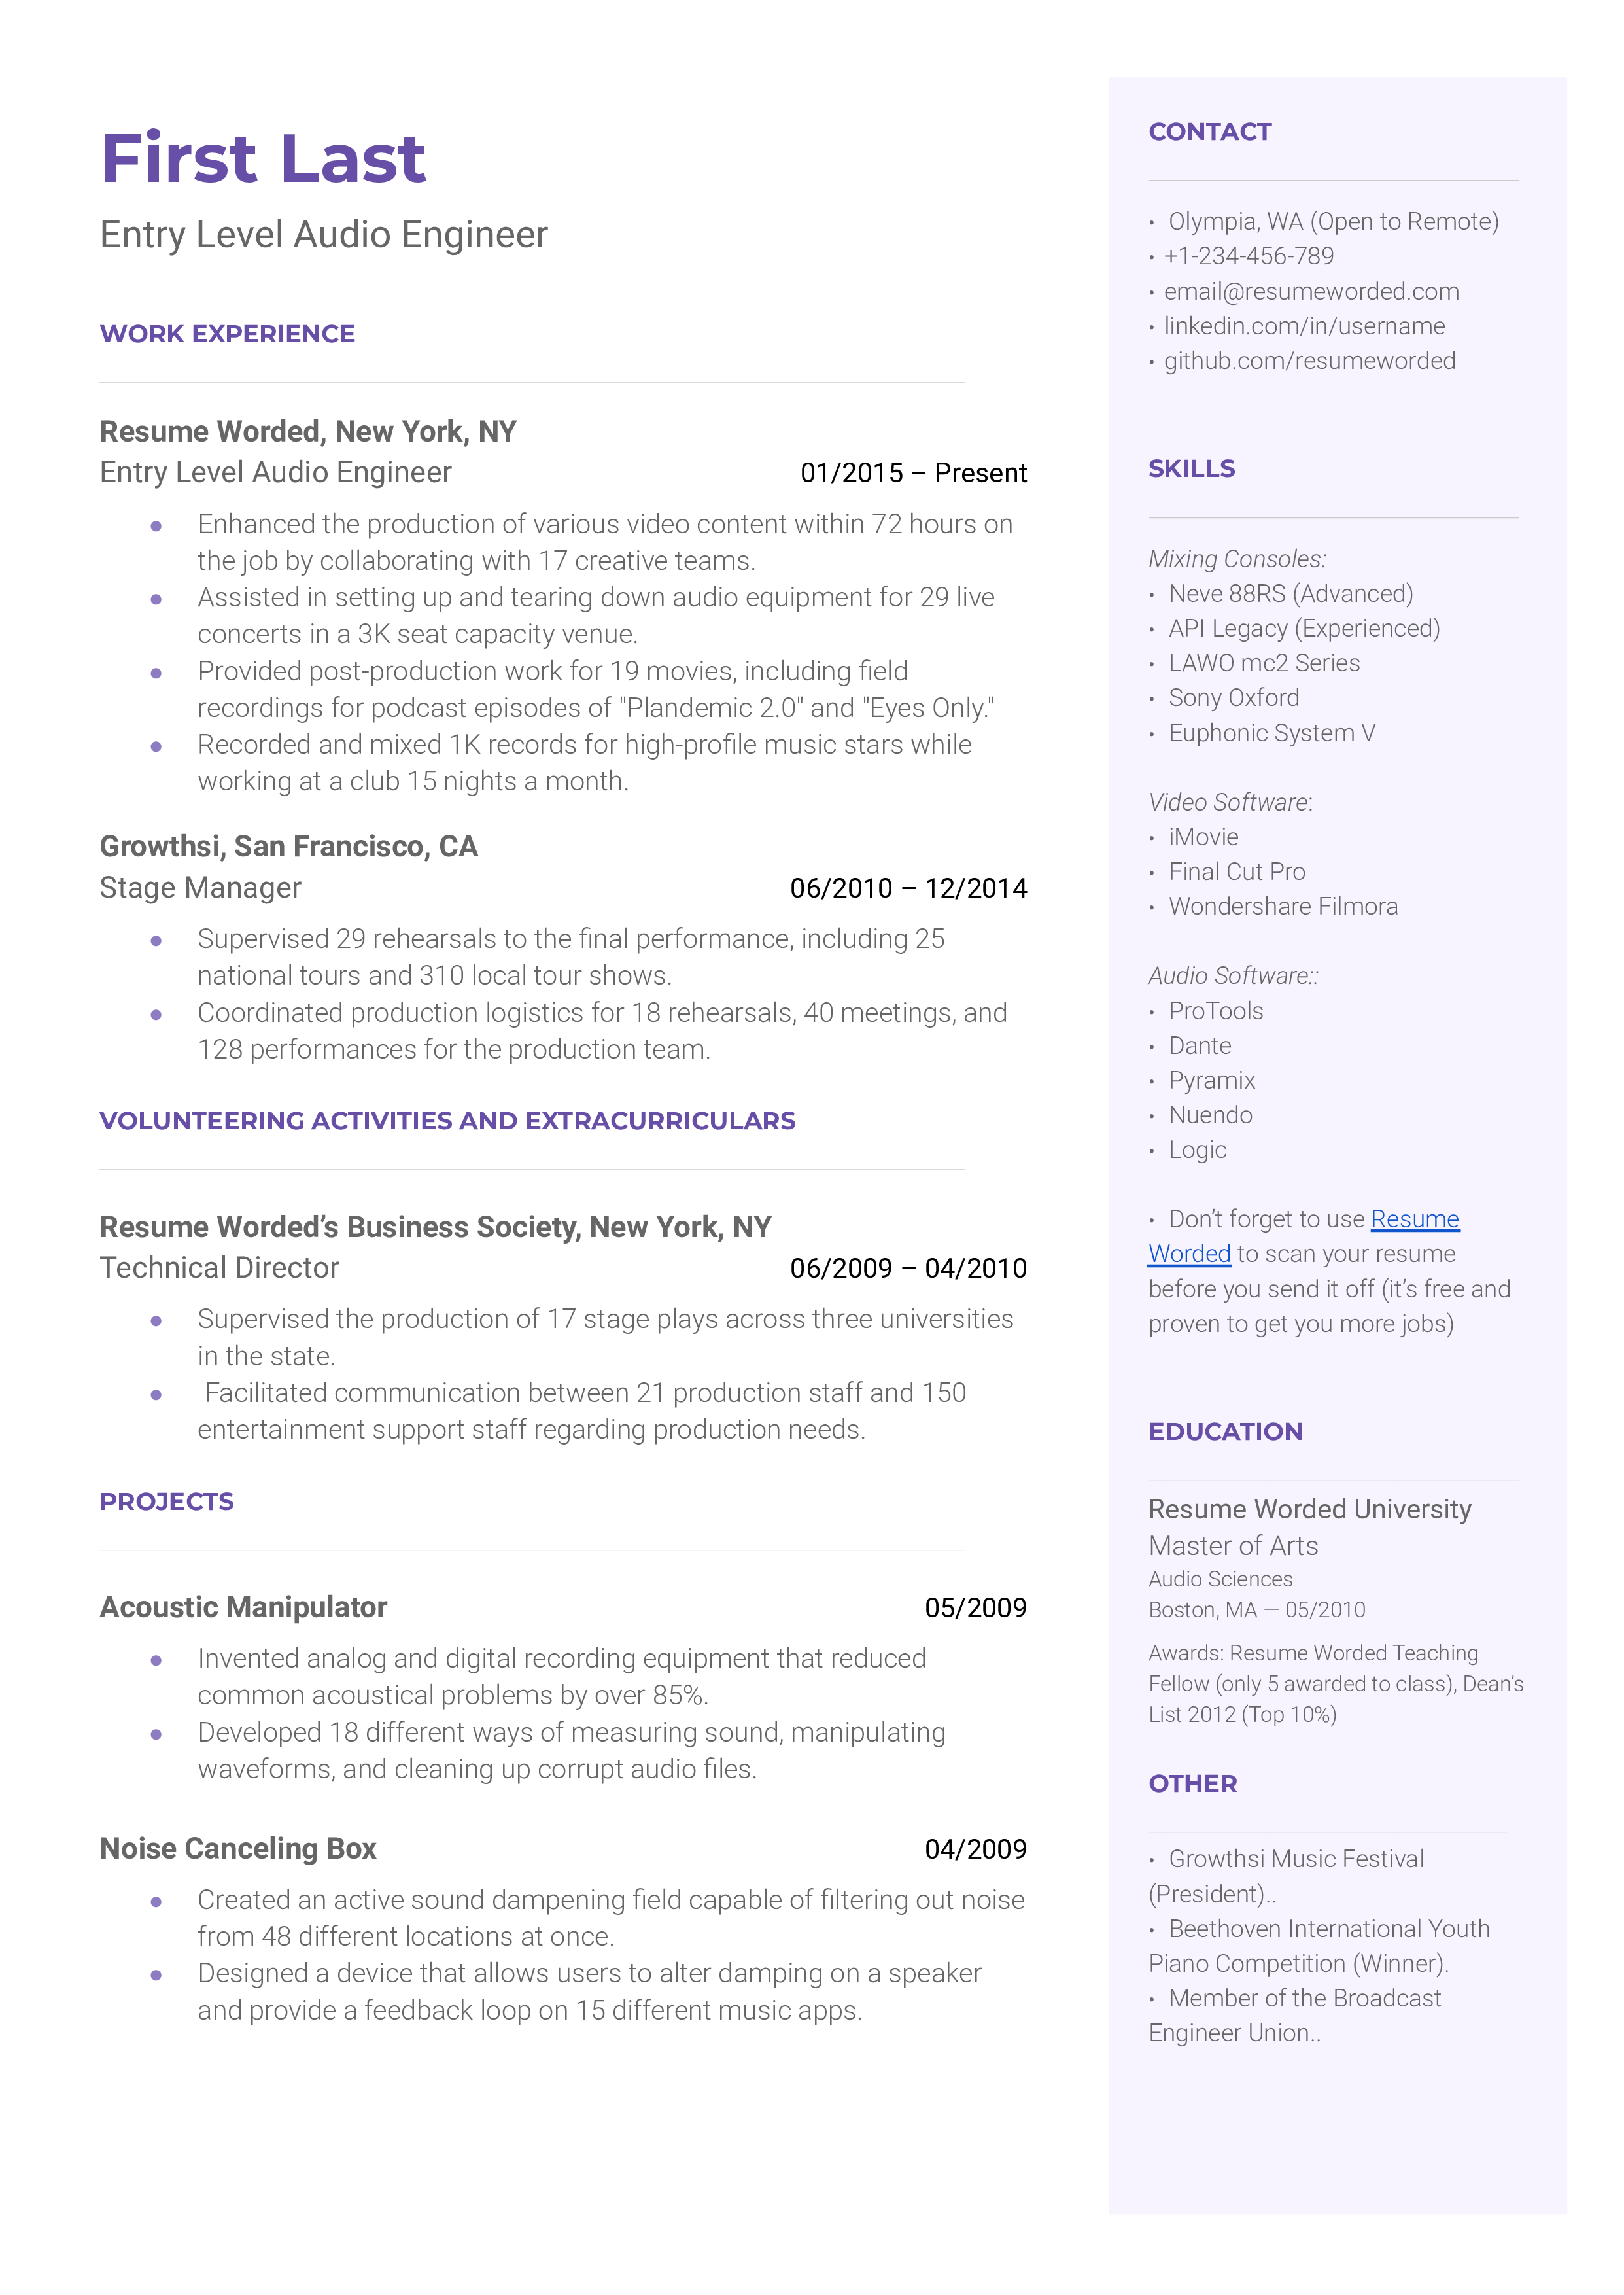 A sample CV for an entry-level audio engineer showcasing familiarity with crucial software and technical understanding of sound manipulation concepts.